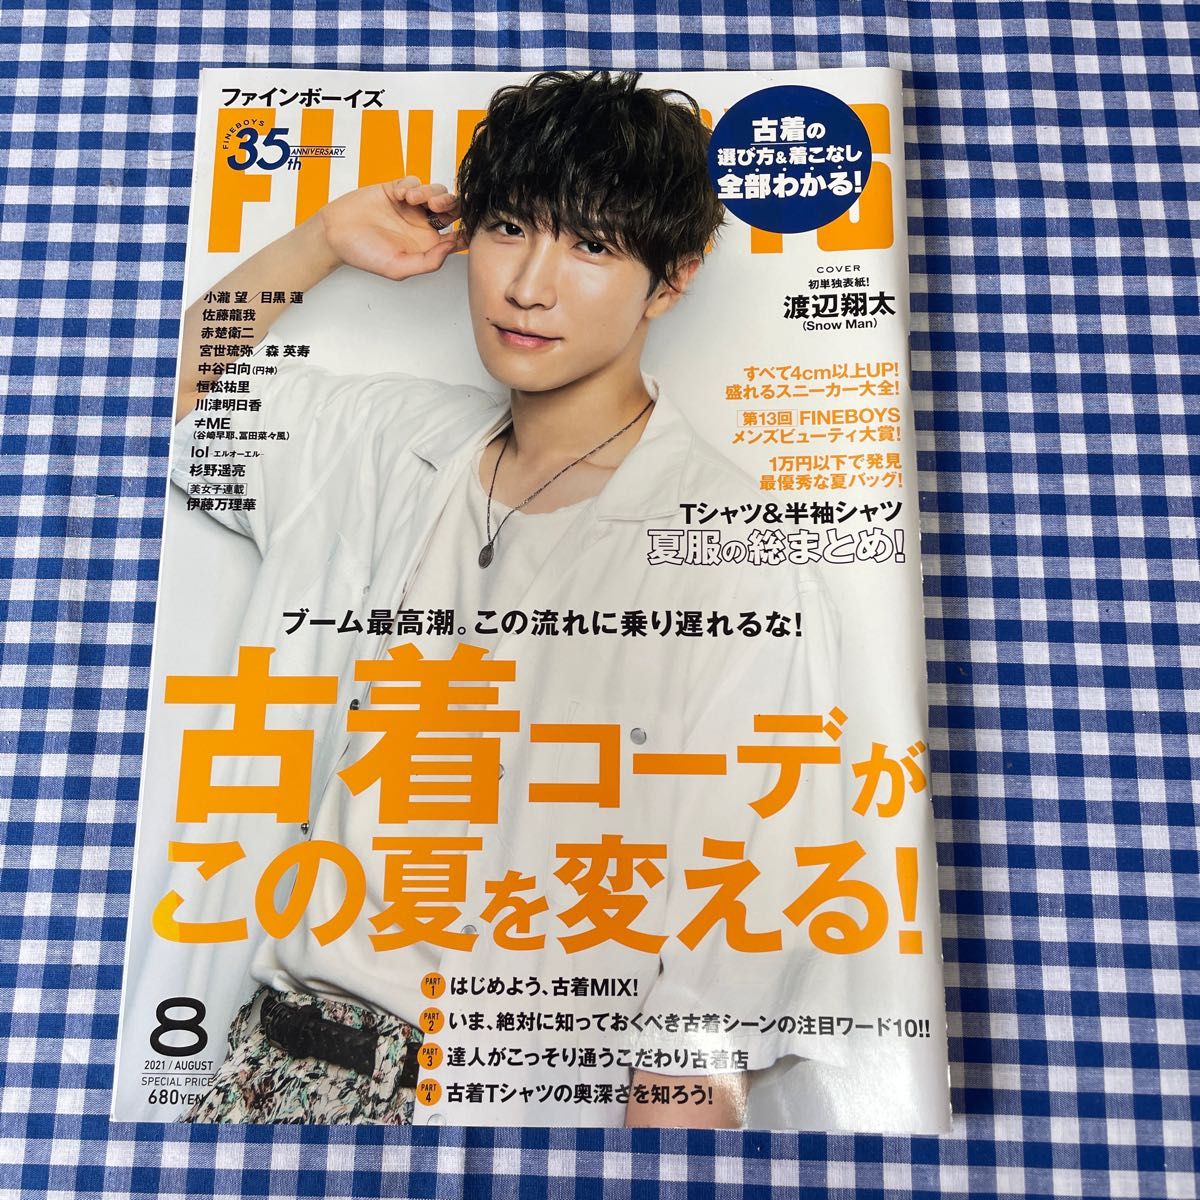 SnowMan 渡辺翔太 表紙 雑誌9冊セット｜PayPayフリマ